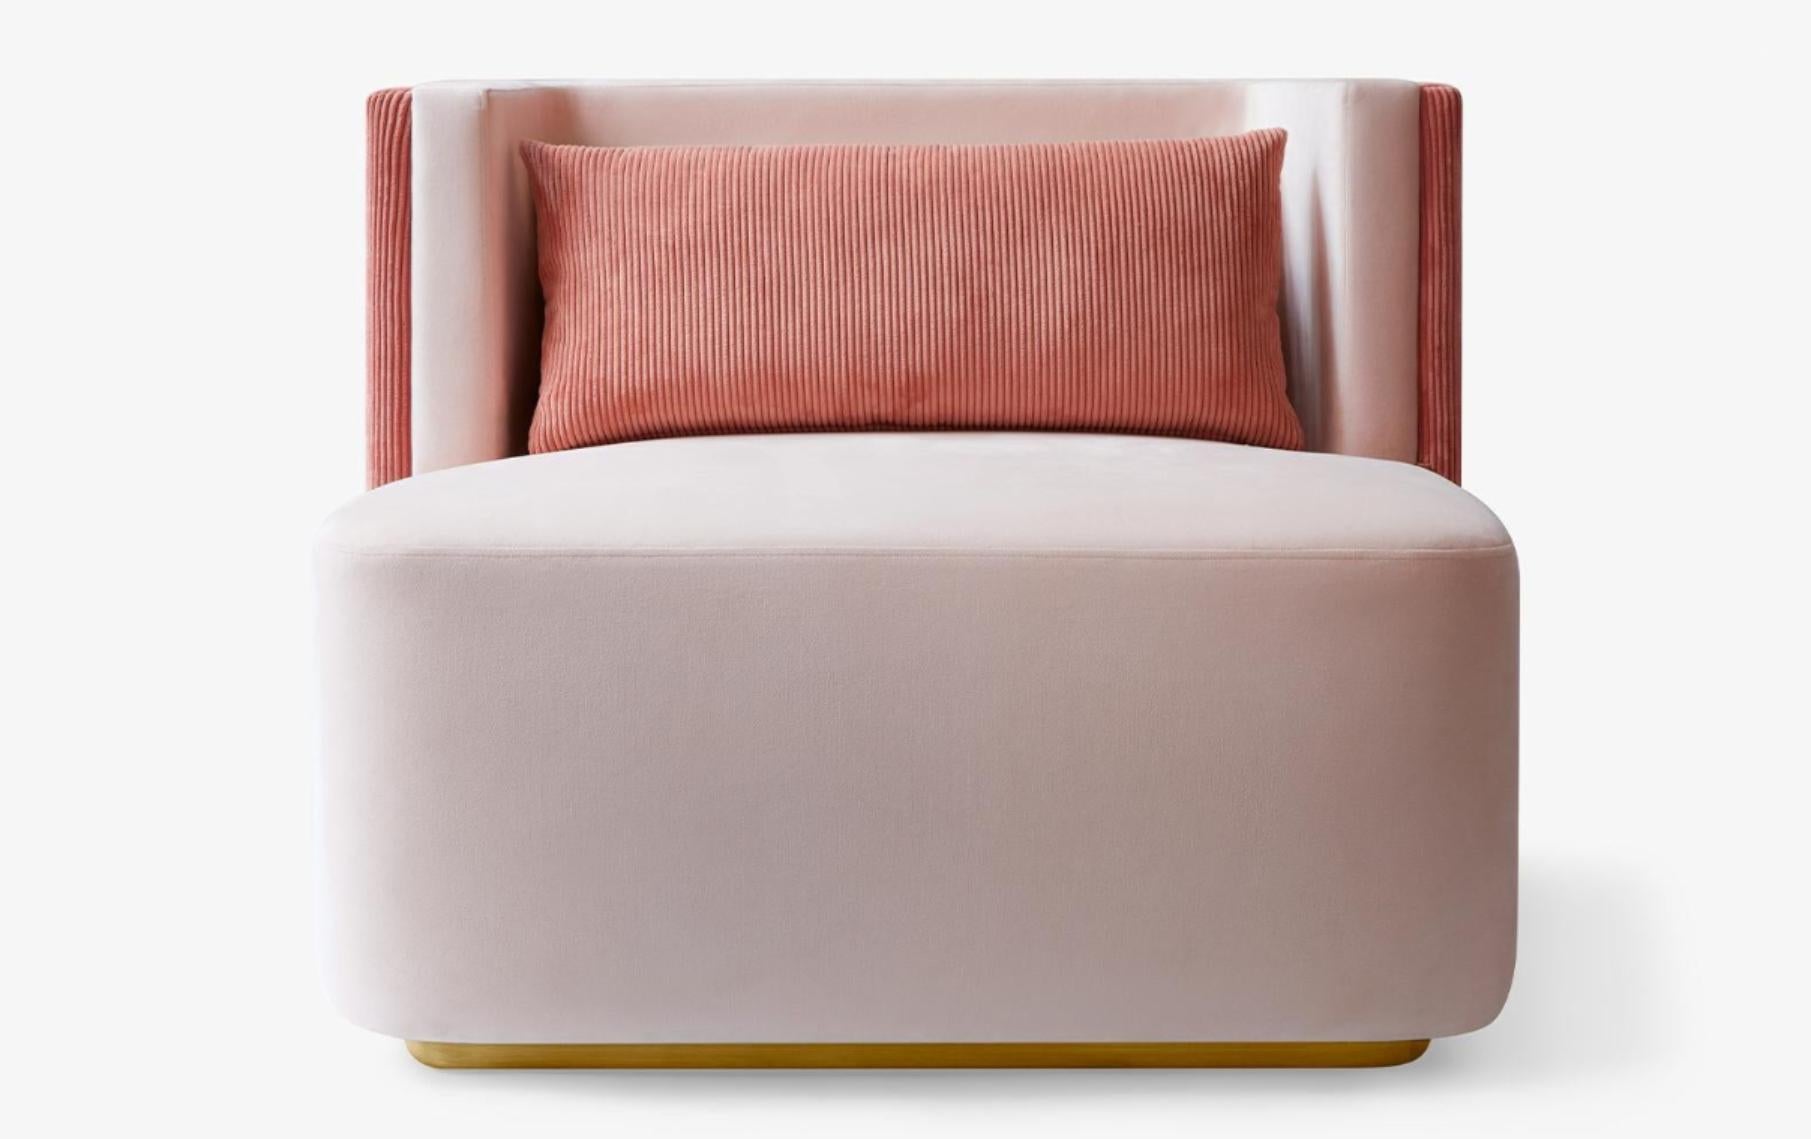 Papillonne Salmon Pink Armchair by Lagu
Designed by Ufuk Ceylan
Dimensions: W 80 x D 72 x H 73 cm
Materials: Brass, Fabric, Foam, Hardwood, Metal, Upholstery.

The Papillonne Salmon pink armchair complements your style with its flawless form and